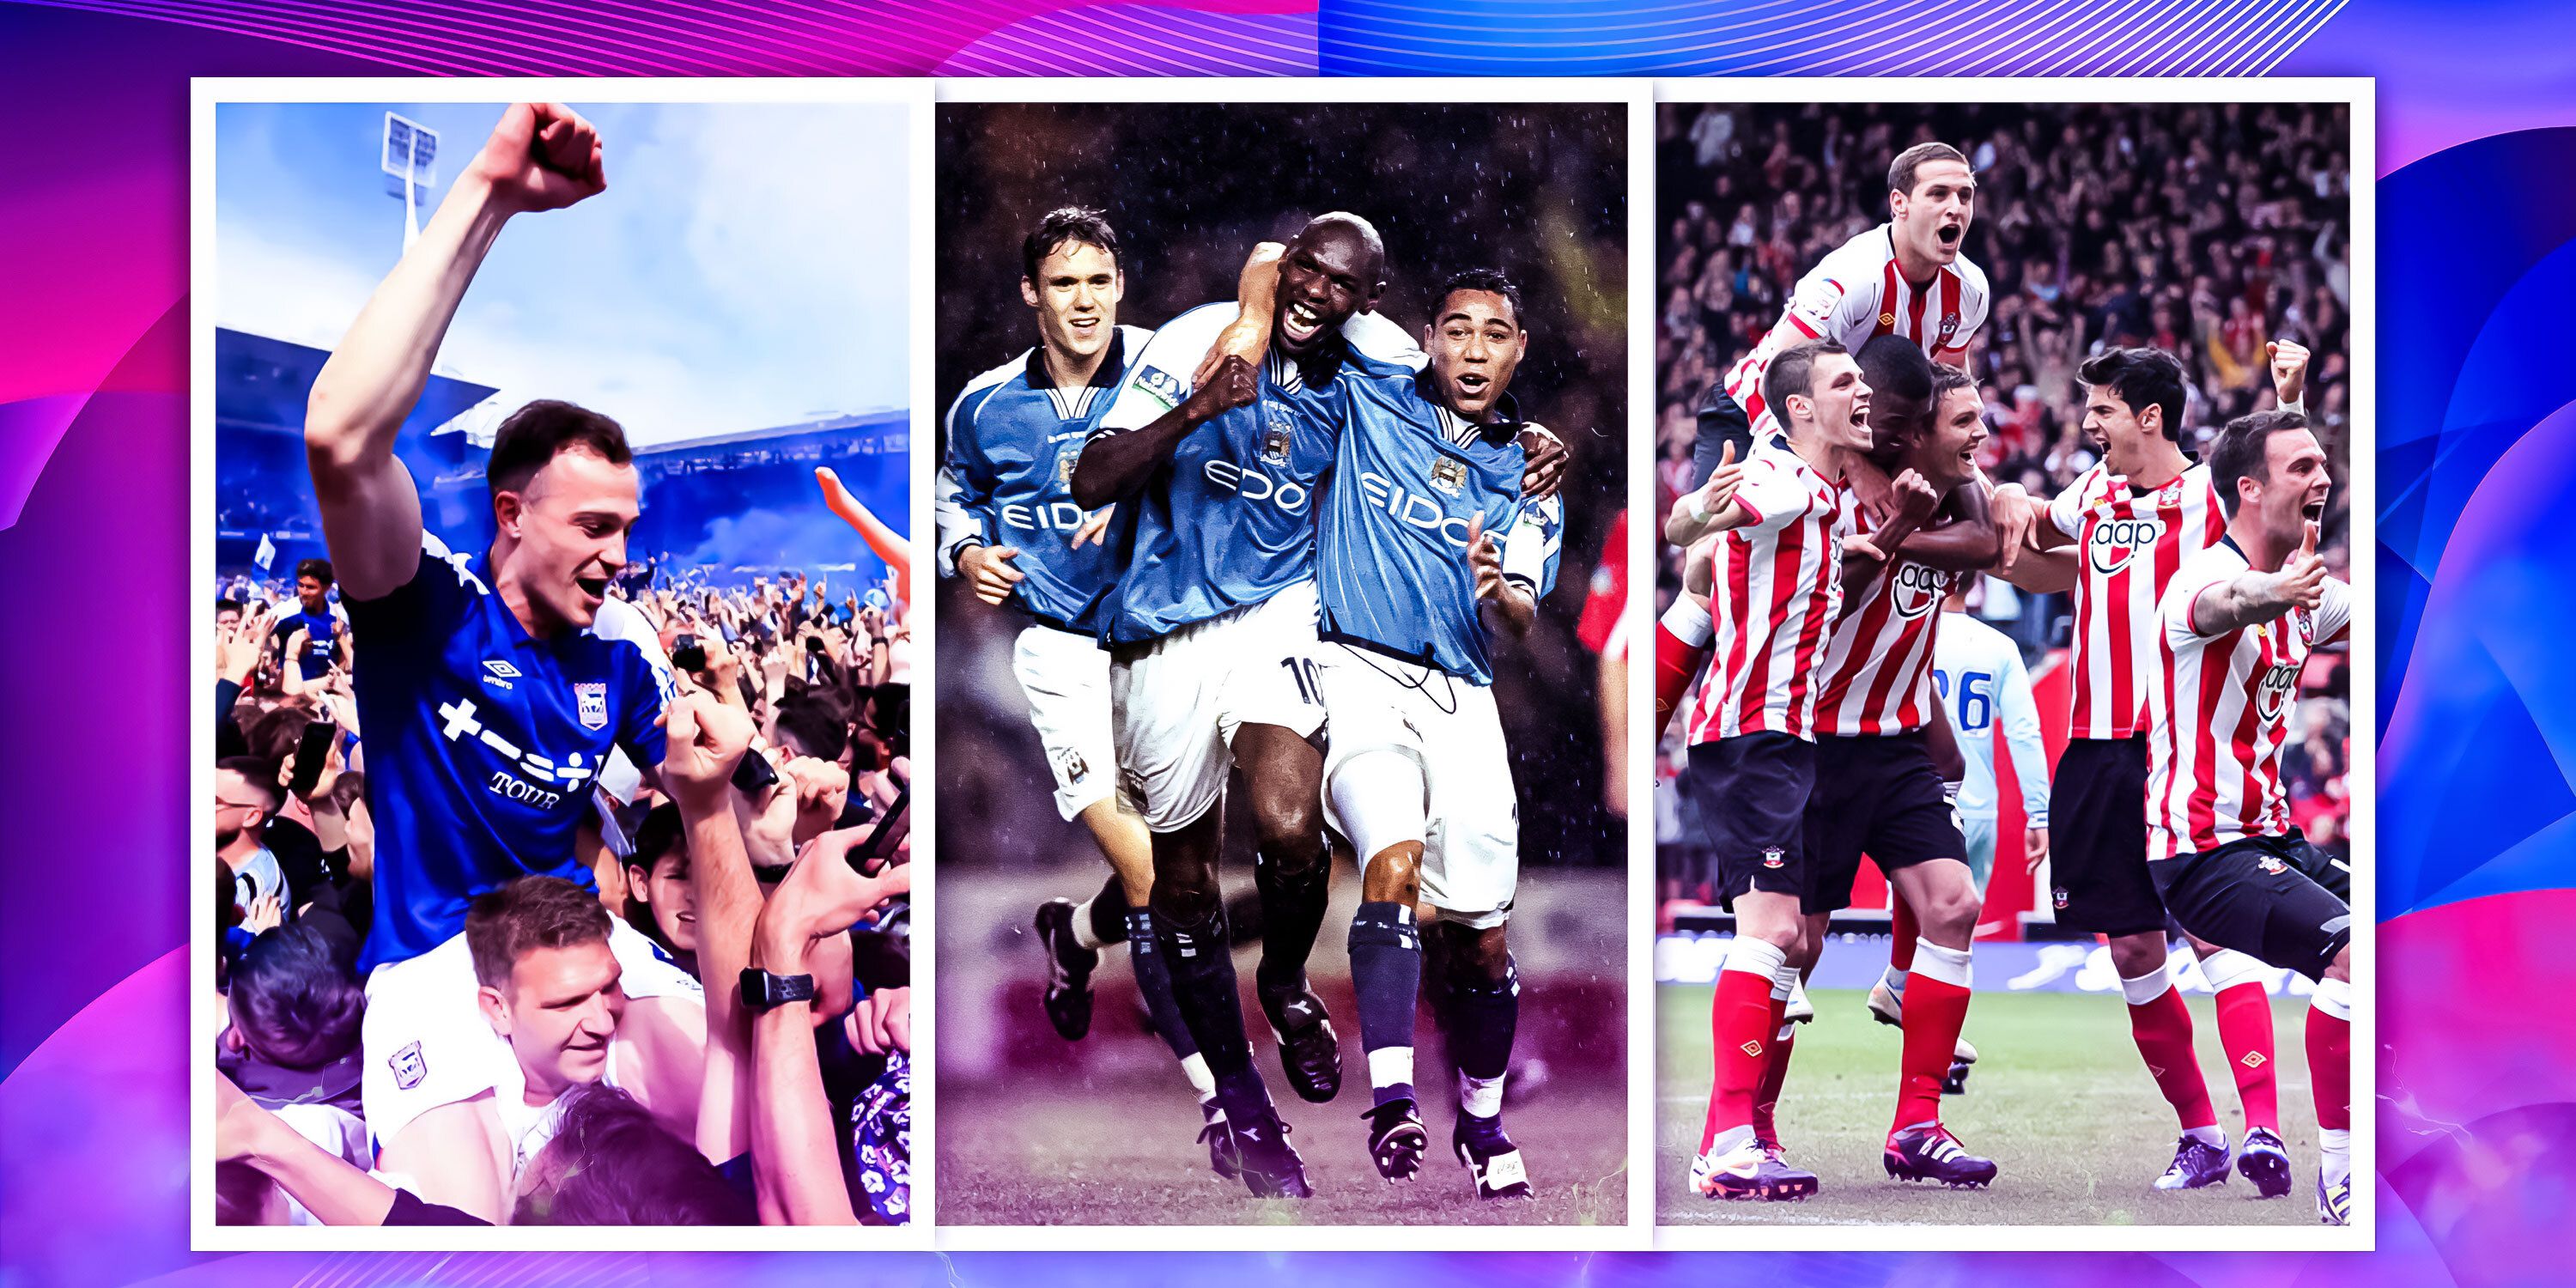 5 Football Clubs Who Achieved Back-to-Back Promotions